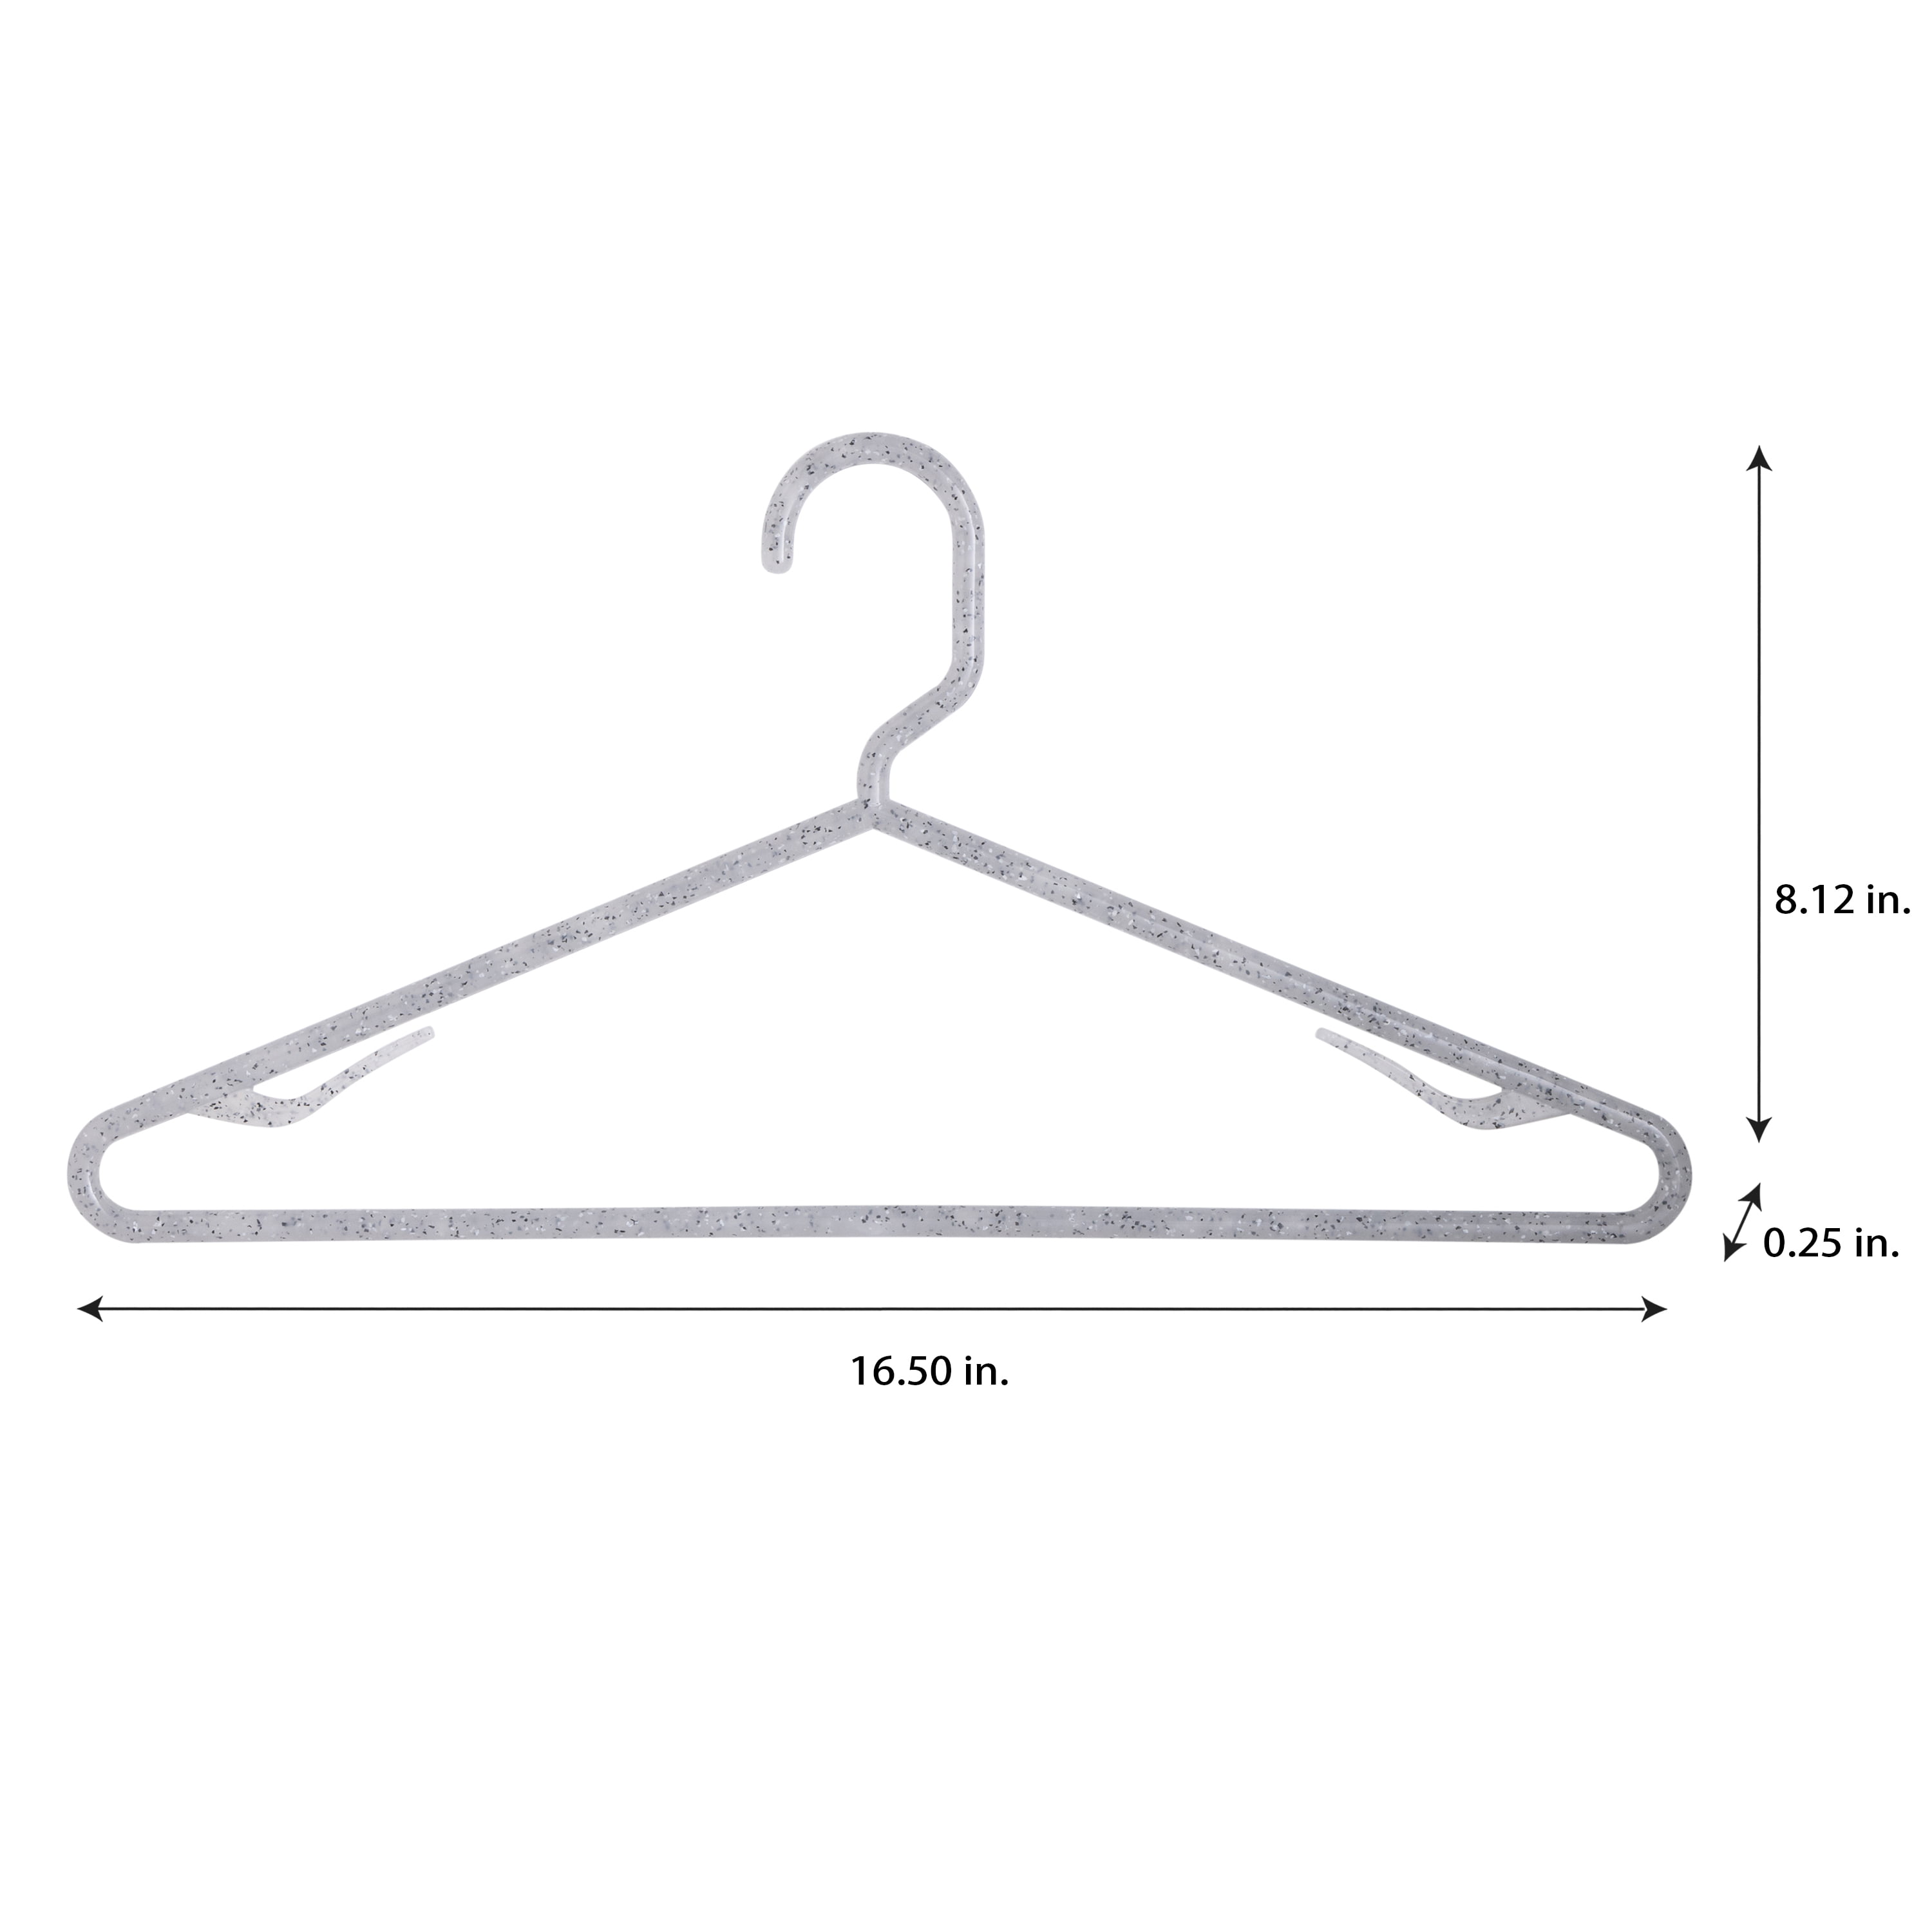 DesignStyles Clear Acrylic Clothes Hangers - 10 Pack Stylish and Heavy Duty Closet Organizer with Silver Chrome Plated Steel